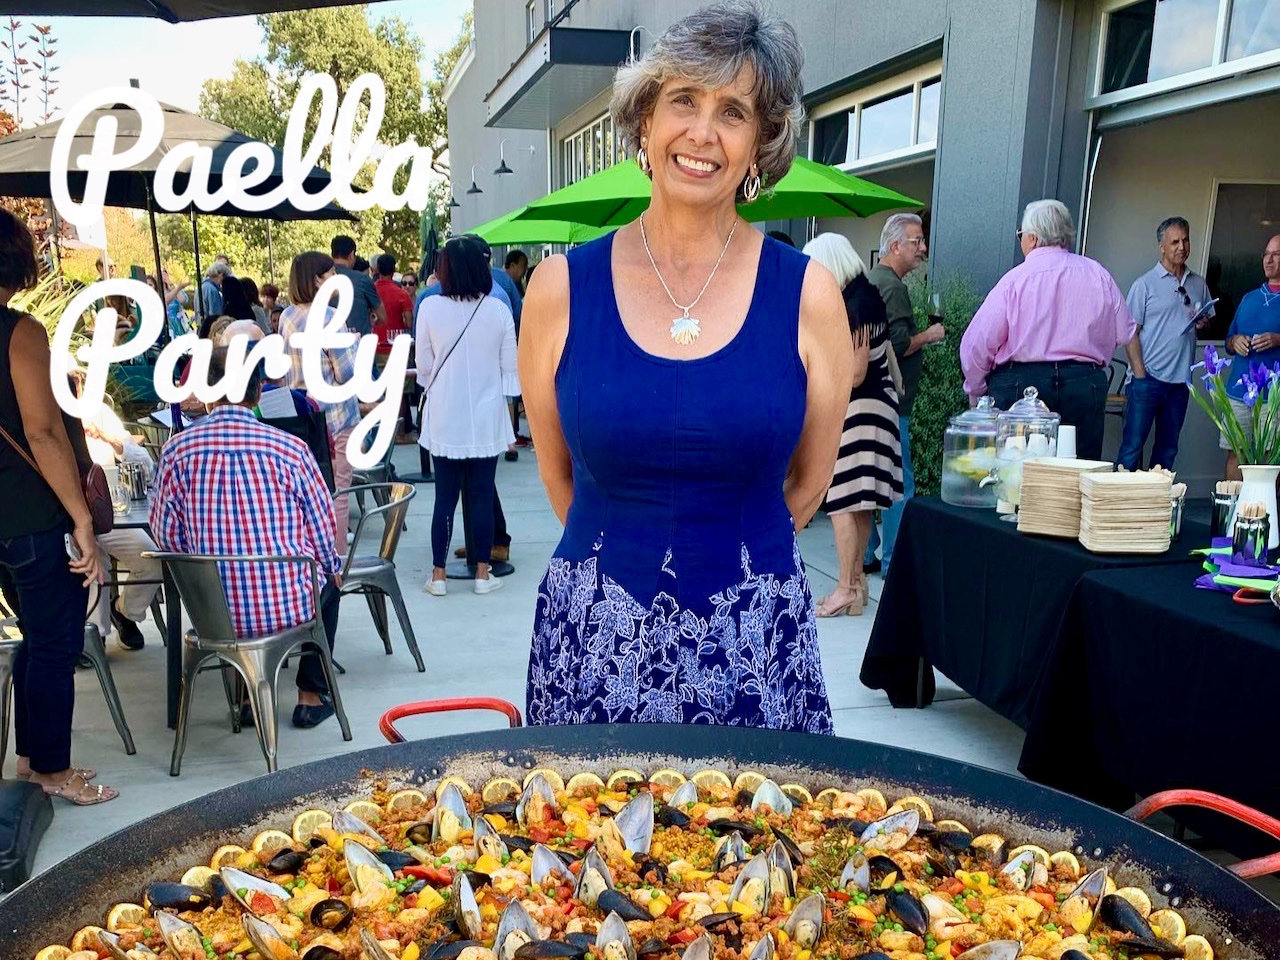 Von is ready for some delicious paella! Other club members and guests enjoying our fall wine release Paella party at Grand Cru Custom Crush in Windsor, CA. 